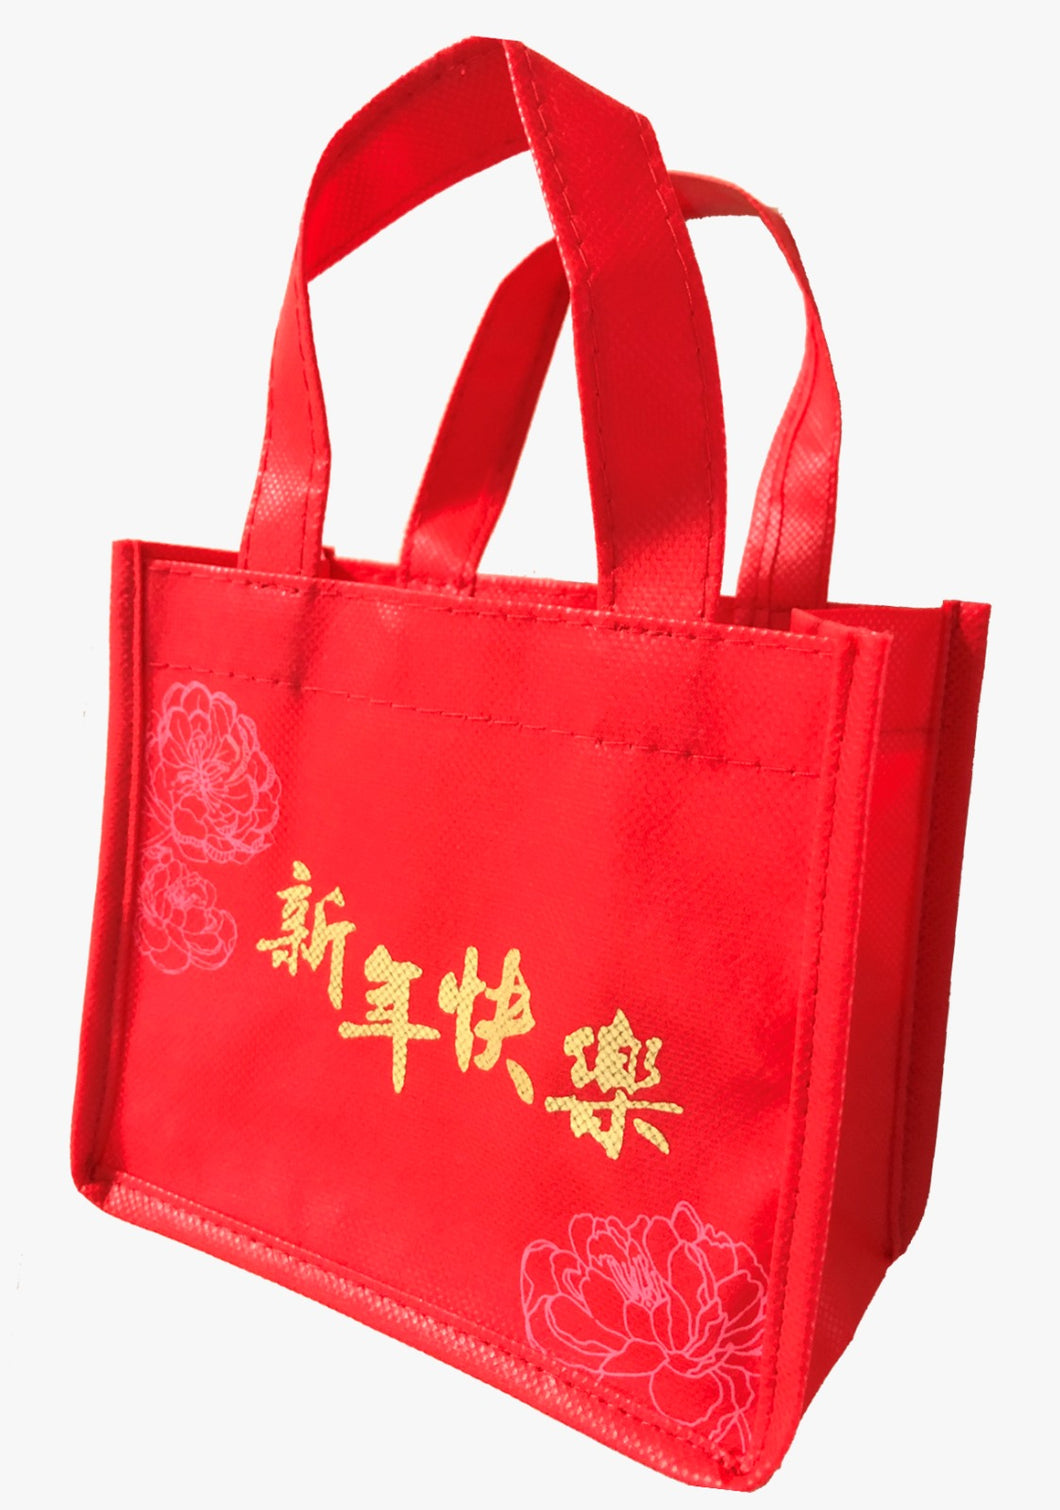 Festive Gifts: Non-woven CNY Festive Carrier Bag (Small)